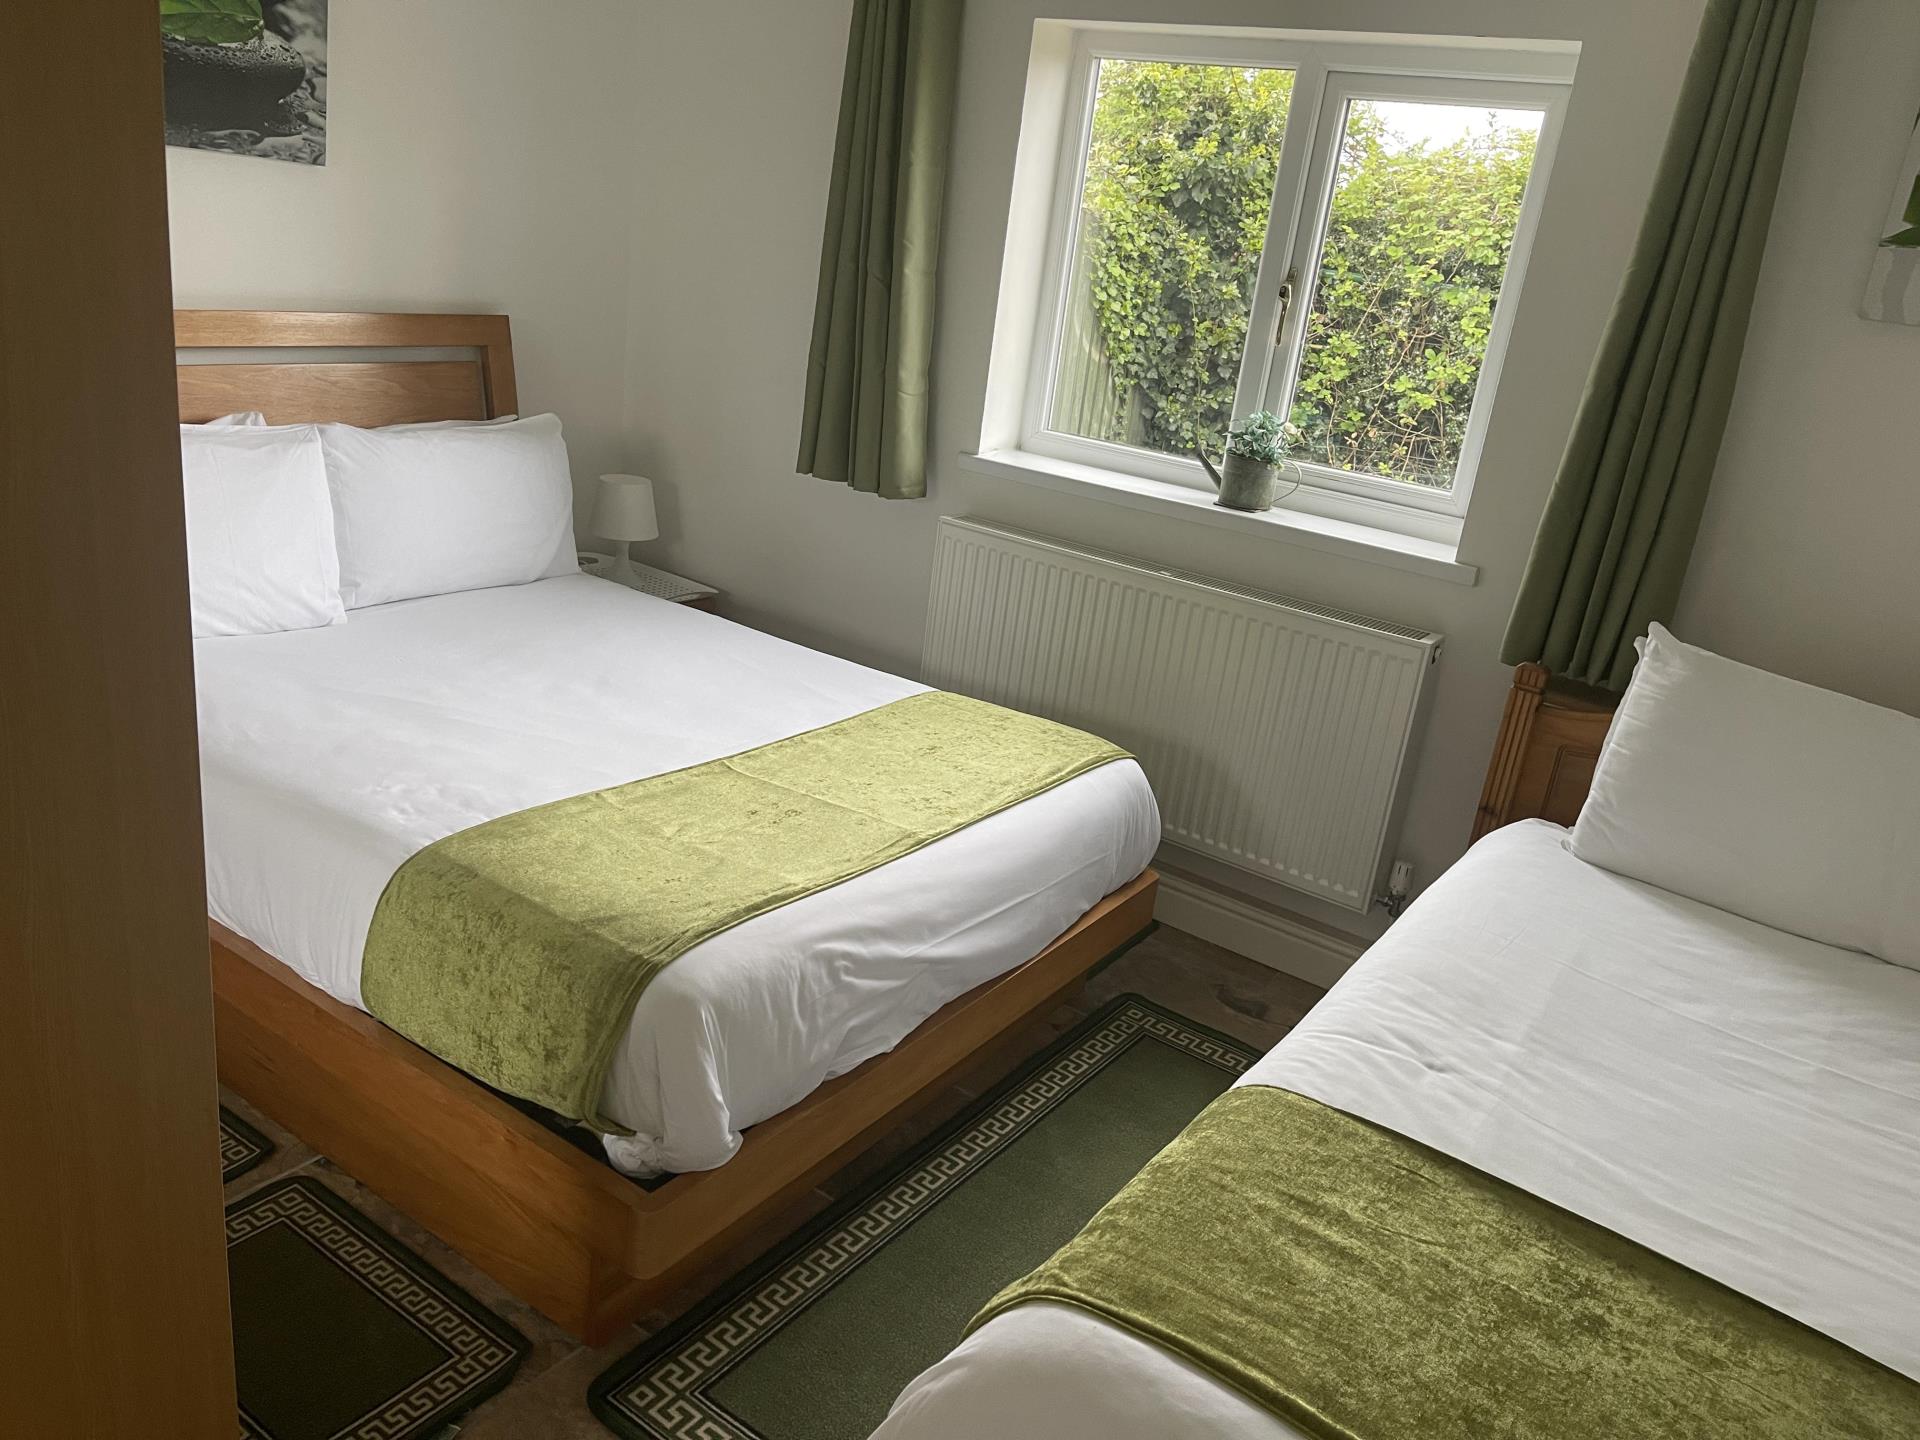 Twin room showing double and single beds